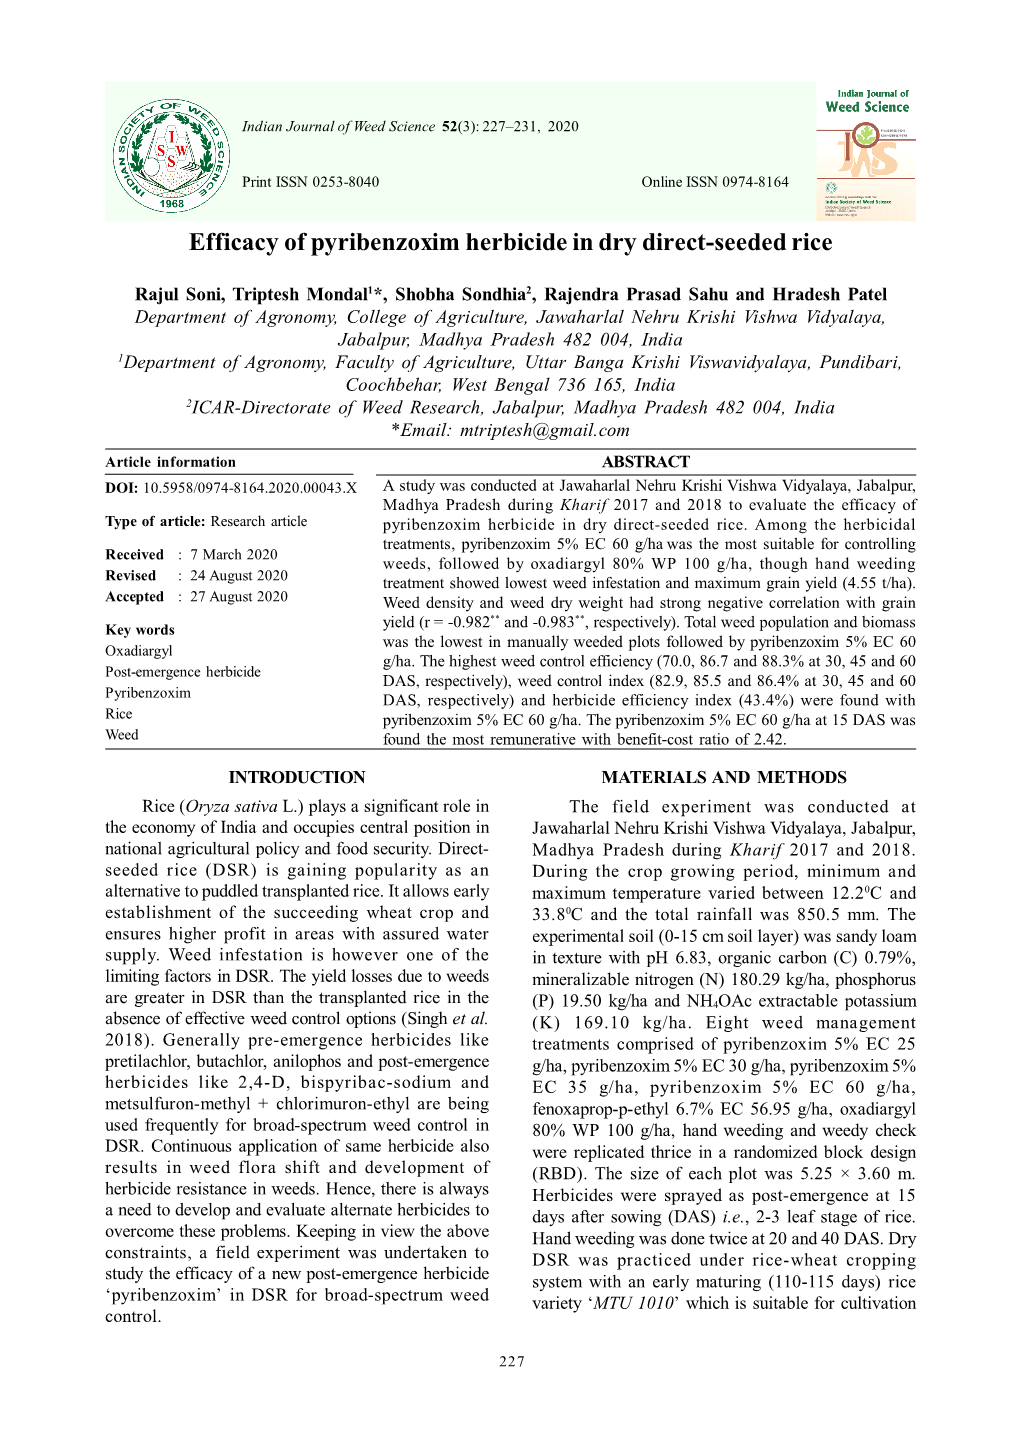 Efficacy of Pyribenzoxim Herbicide in Dry Direct-Seeded Rice